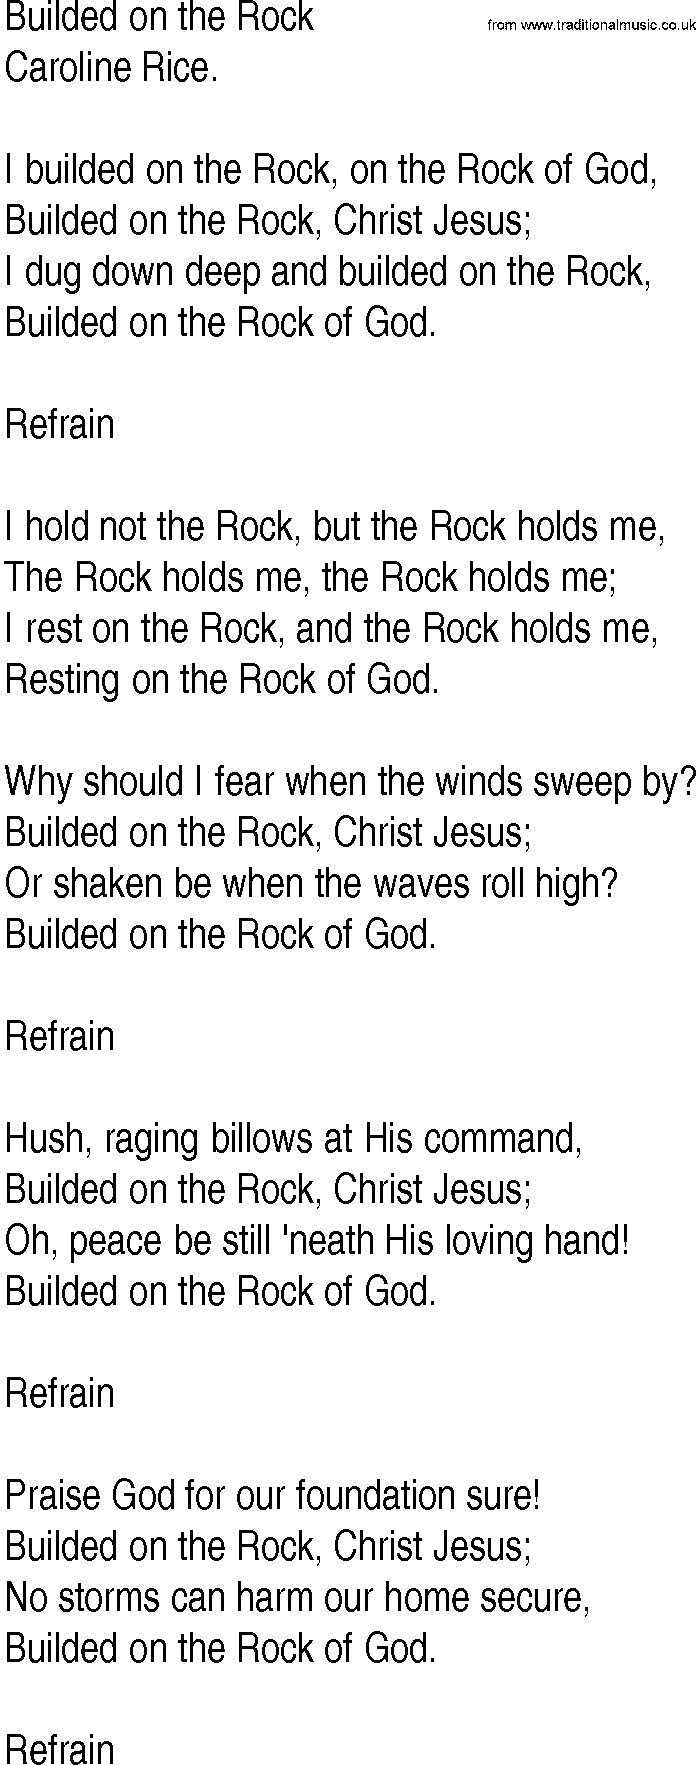 Hymn and Gospel Song: Builded on the Rock by Caroline Rice lyrics